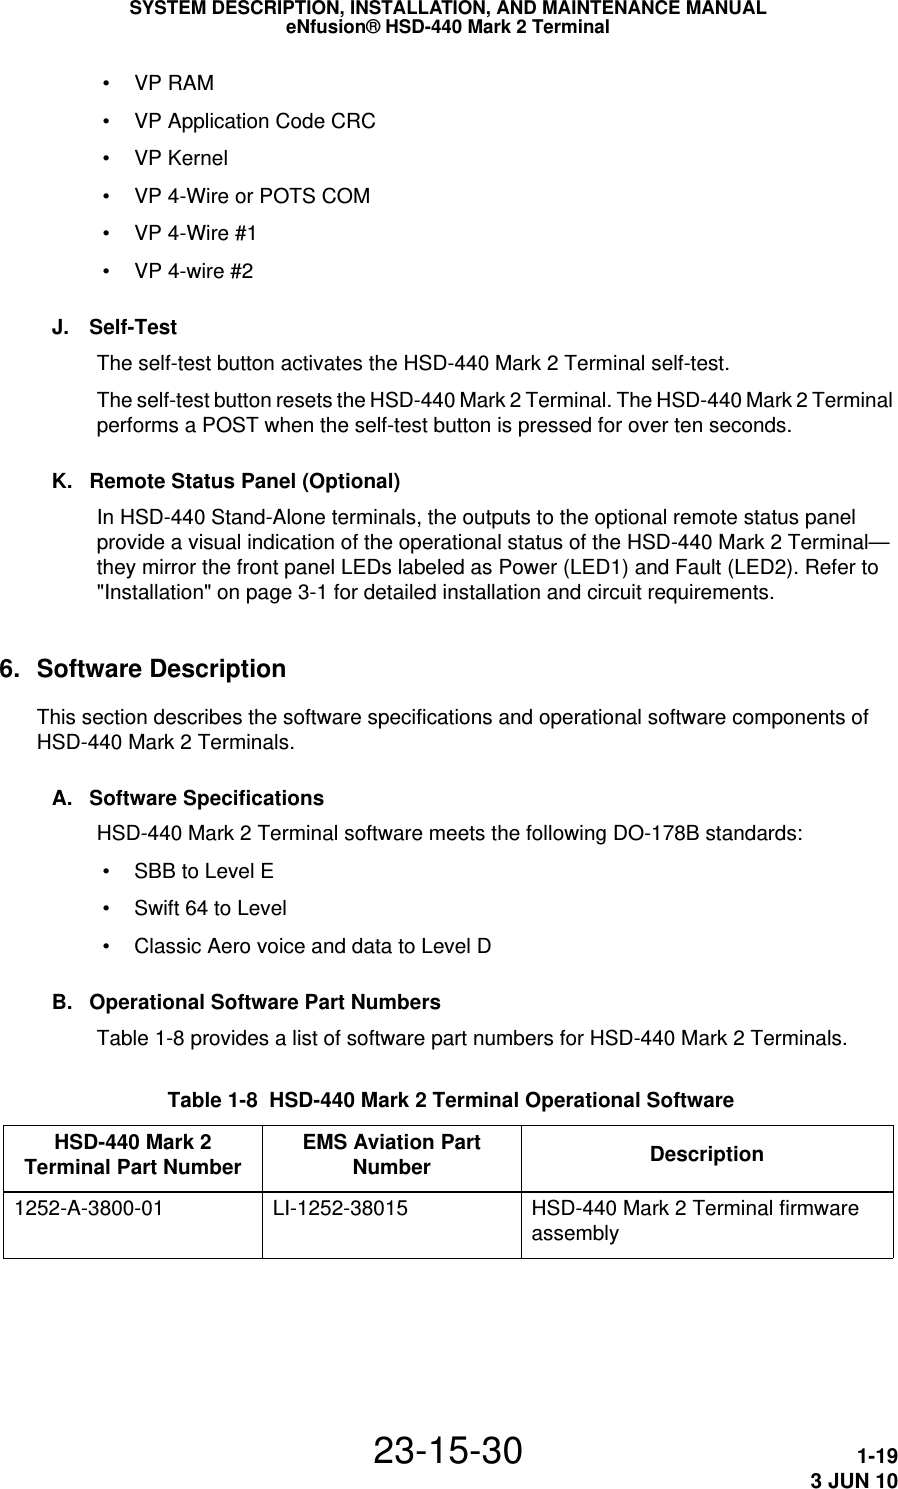 SYSTEM DESCRIPTION, INSTALLATION, AND MAINTENANCE MANUALeNfusion® HSD-440 Mark 2 Terminal23-15-30 1-193 JUN 10 • VP RAM • VP Application Code CRC • VP Kernel • VP 4-Wire or POTS COM • VP 4-Wire #1 • VP 4-wire #2J. Self-TestThe self-test button activates the HSD-440 Mark 2 Terminal self-test.The self-test button resets the HSD-440 Mark 2 Terminal. The HSD-440 Mark 2 Terminal performs a POST when the self-test button is pressed for over ten seconds.K. Remote Status Panel (Optional)In HSD-440 Stand-Alone terminals, the outputs to the optional remote status panel provide a visual indication of the operational status of the HSD-440 Mark 2 Terminal—they mirror the front panel LEDs labeled as Power (LED1) and Fault (LED2). Refer to &quot;Installation&quot; on page 3-1 for detailed installation and circuit requirements.6. Software DescriptionThis section describes the software specifications and operational software components of HSD-440 Mark 2 Terminals.A. Software SpecificationsHSD-440 Mark 2 Terminal software meets the following DO-178B standards: • SBB to Level E • Swift 64 to Level  • Classic Aero voice and data to Level DB. Operational Software Part NumbersTable 1-8 provides a list of software part numbers for HSD-440 Mark 2 Terminals. Table 1-8  HSD-440 Mark 2 Terminal Operational Software HSD-440 Mark 2 Terminal Part Number EMS Aviation Part Number Description1252-A-3800-01 LI-1252-38015 HSD-440 Mark 2 Terminal firmware assembly